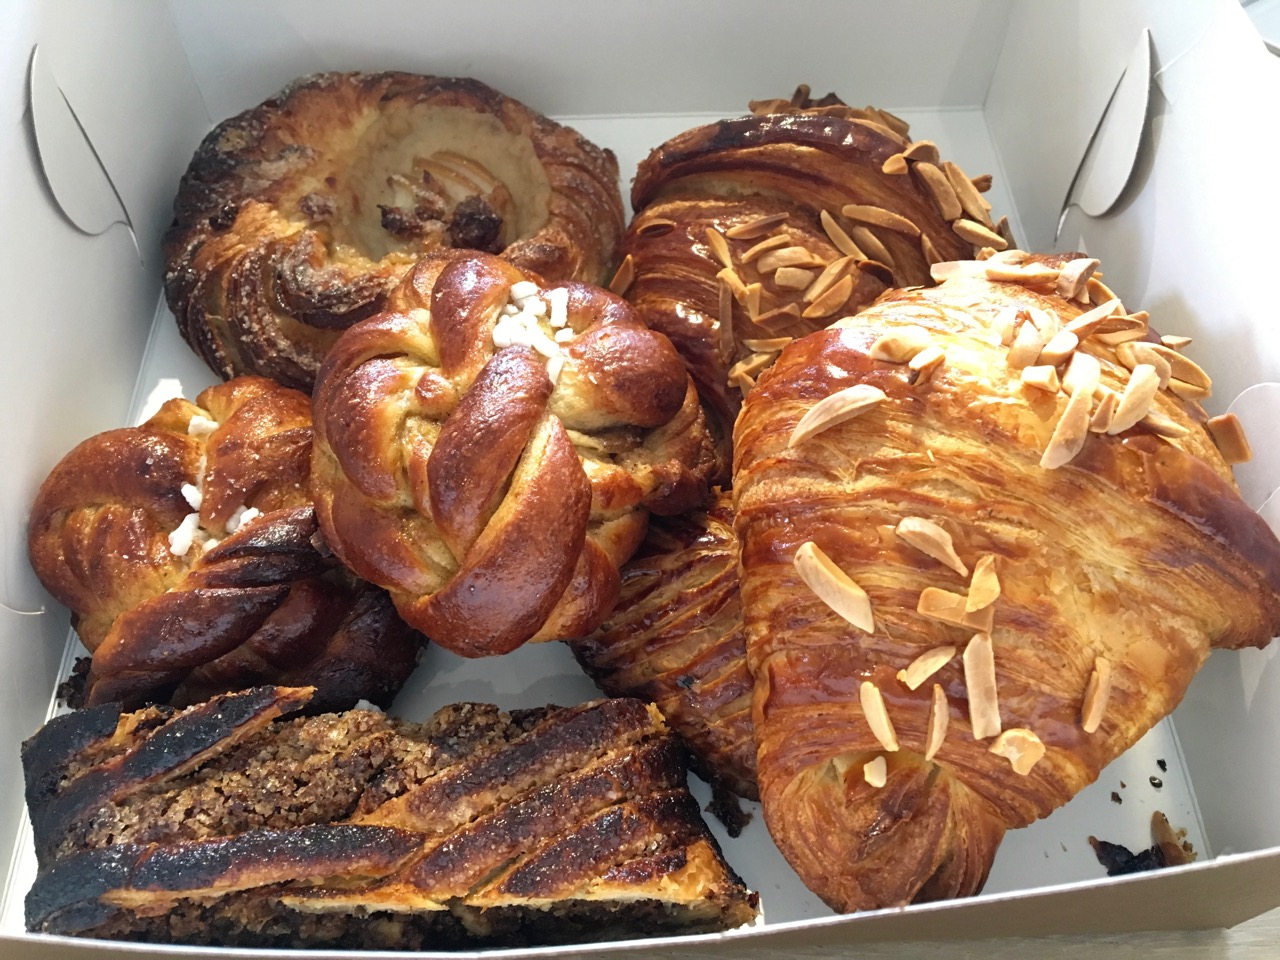 Pastries from owl bakery